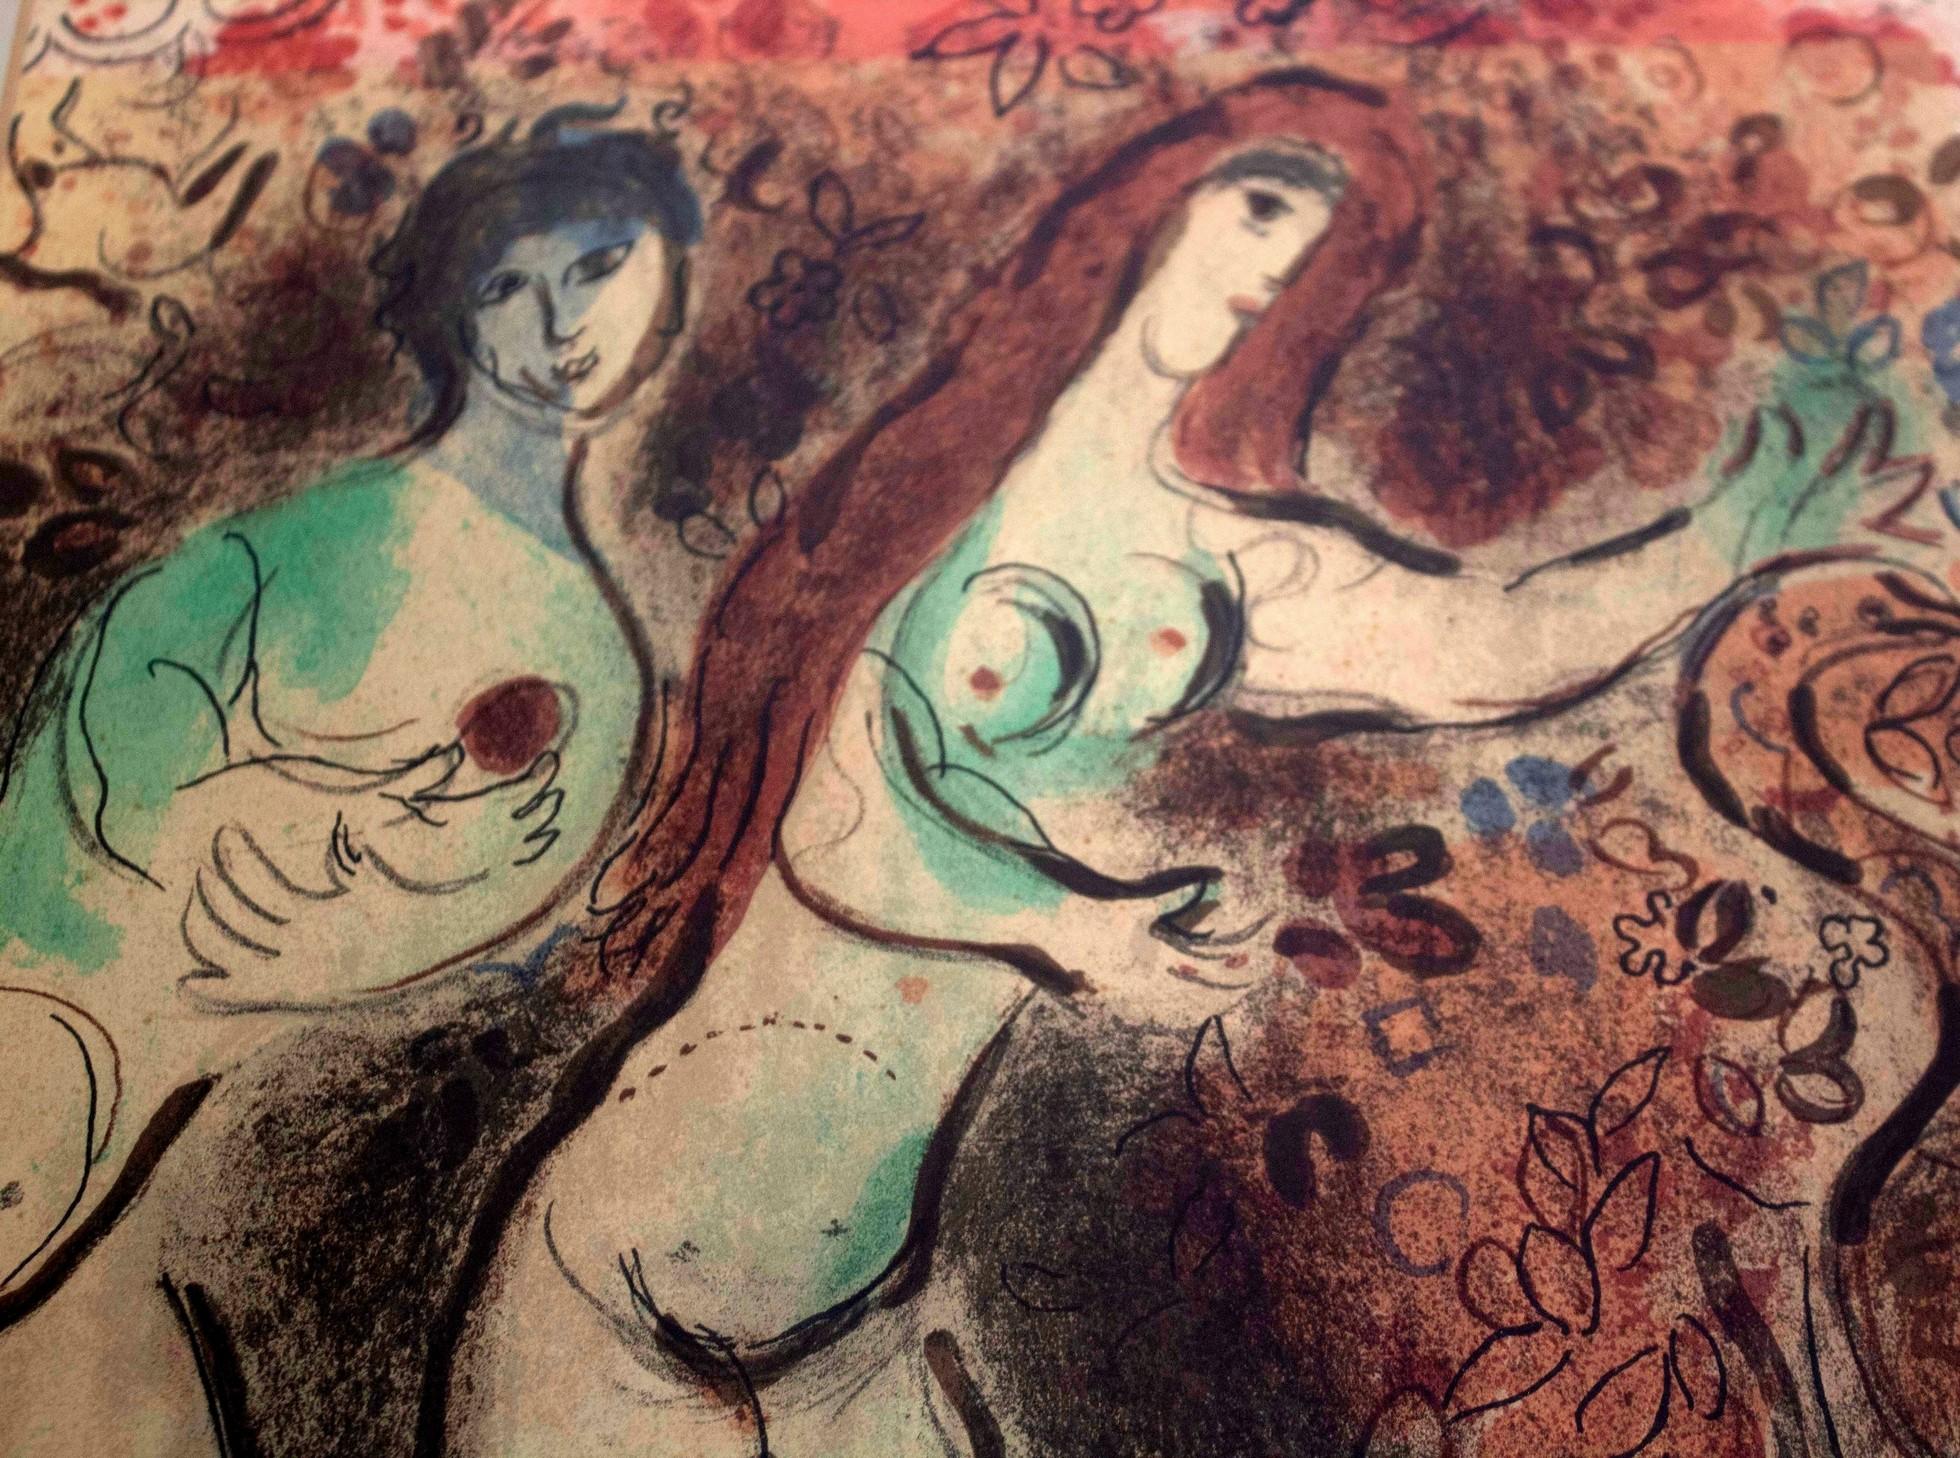 Paper Mid-Century Modern Marc Chagall Adam & Eve and the Forbidden Fruit Lithograph 19